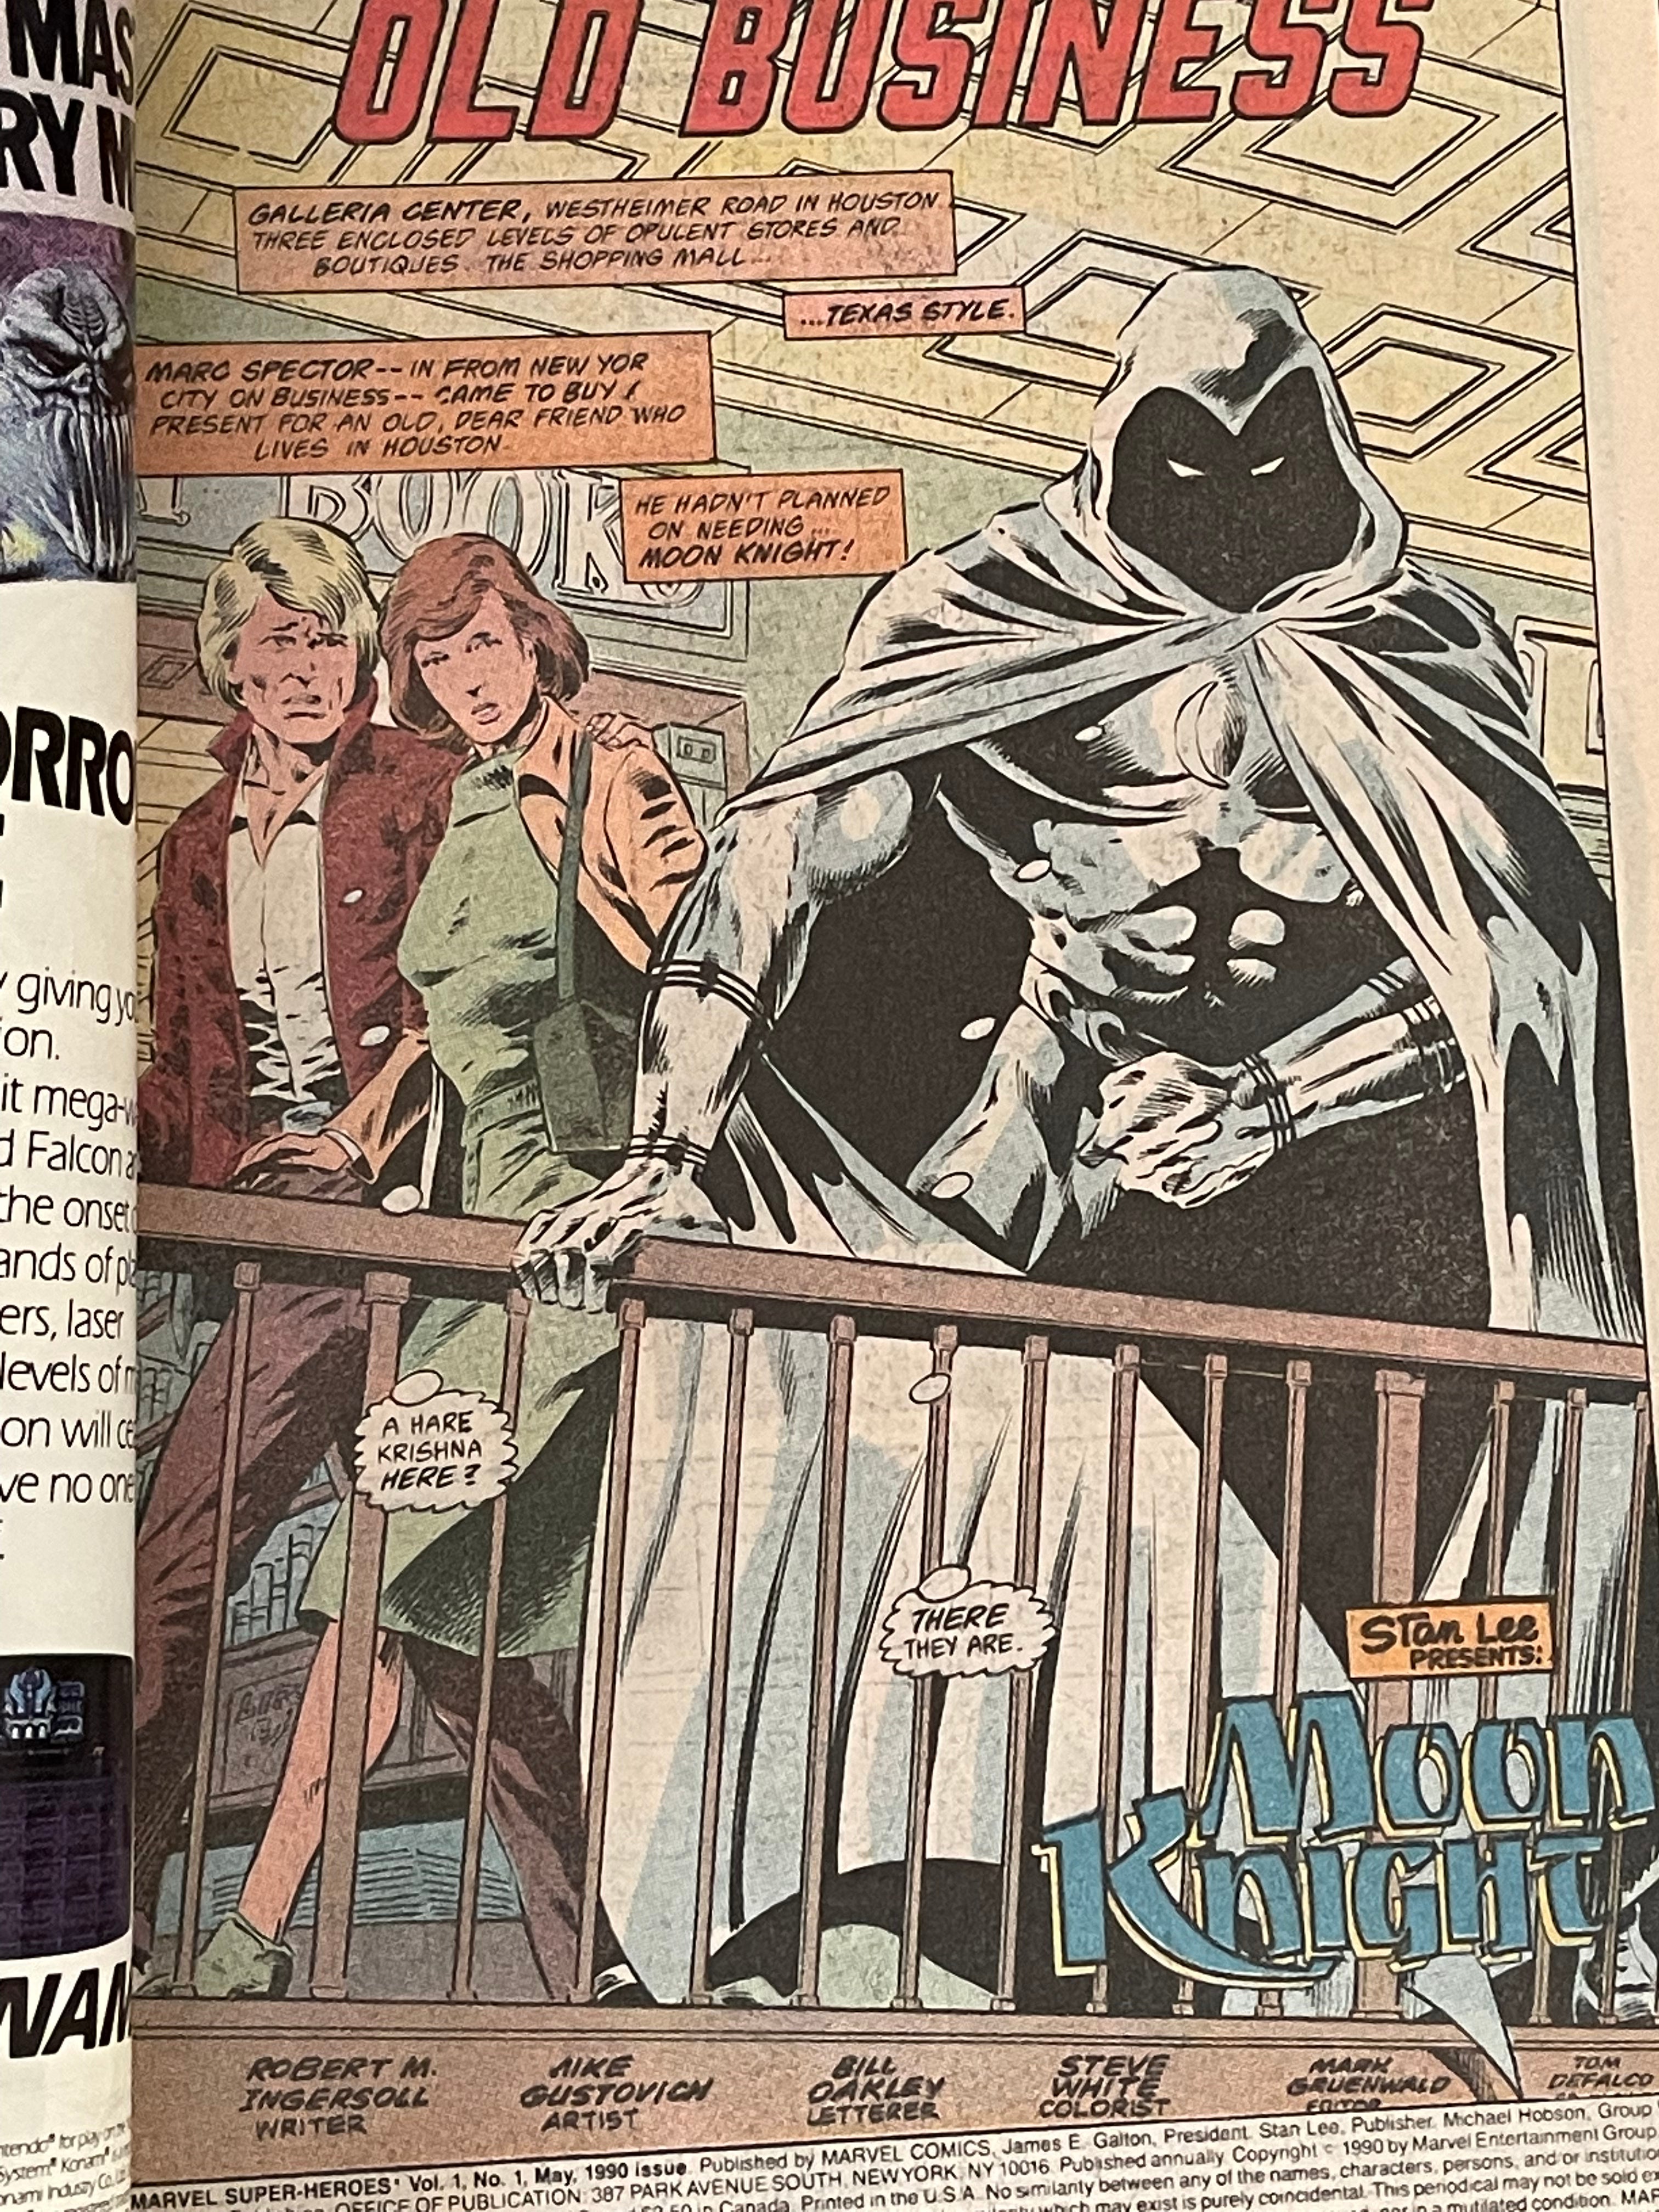 Marvel Super-Heroes #1 spring special with Moon Knight